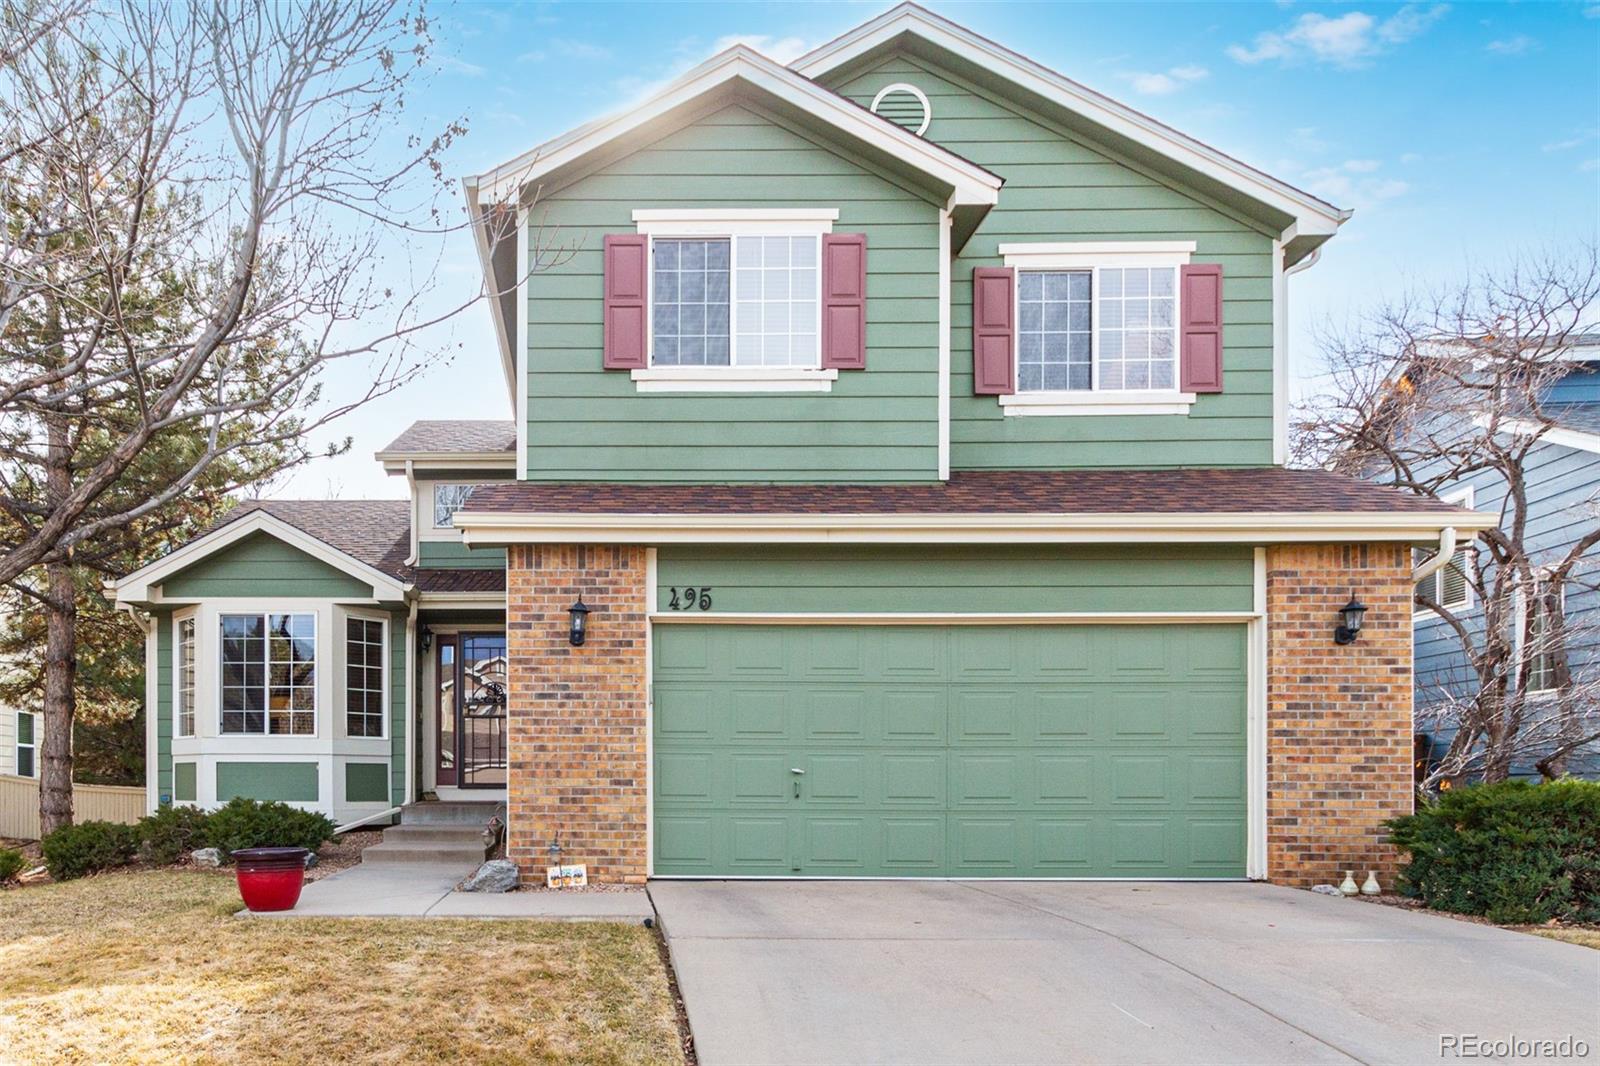 495  Rose Finch Circle, highlands ranch MLS: 8422706 Beds: 4 Baths: 4 Price: $655,000